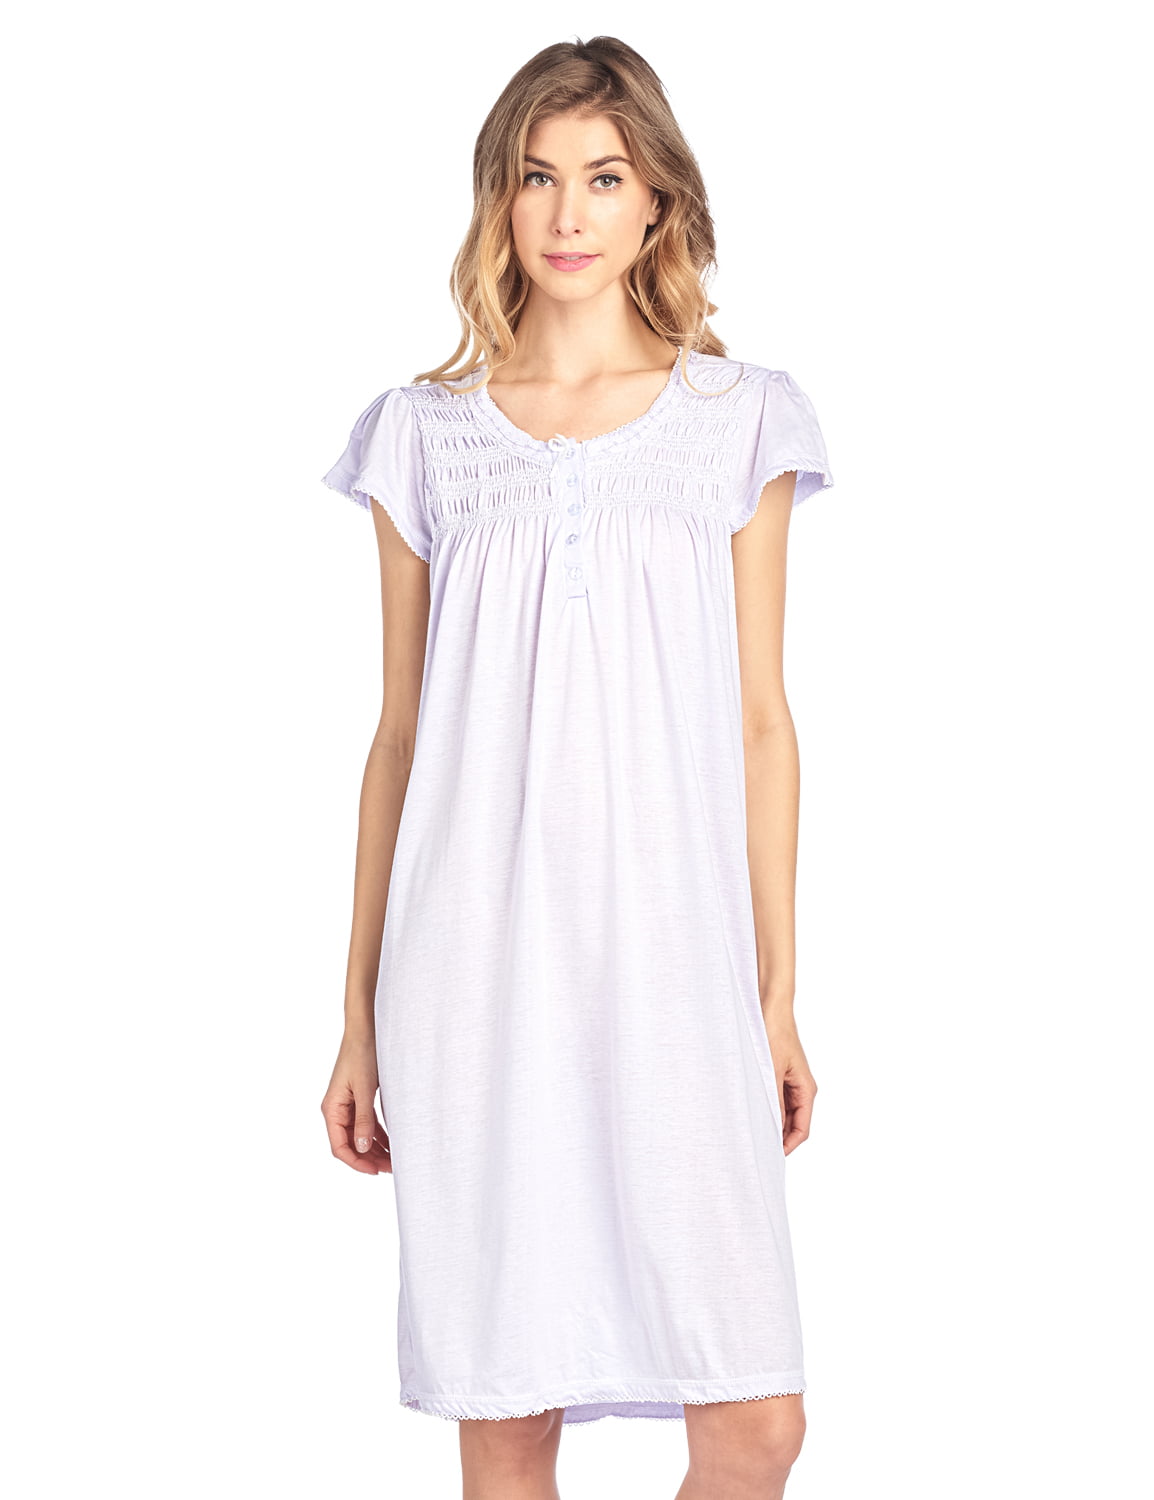 4X Casual Nights Women's Smocked Lace Short Sleeve Nightgown Purple